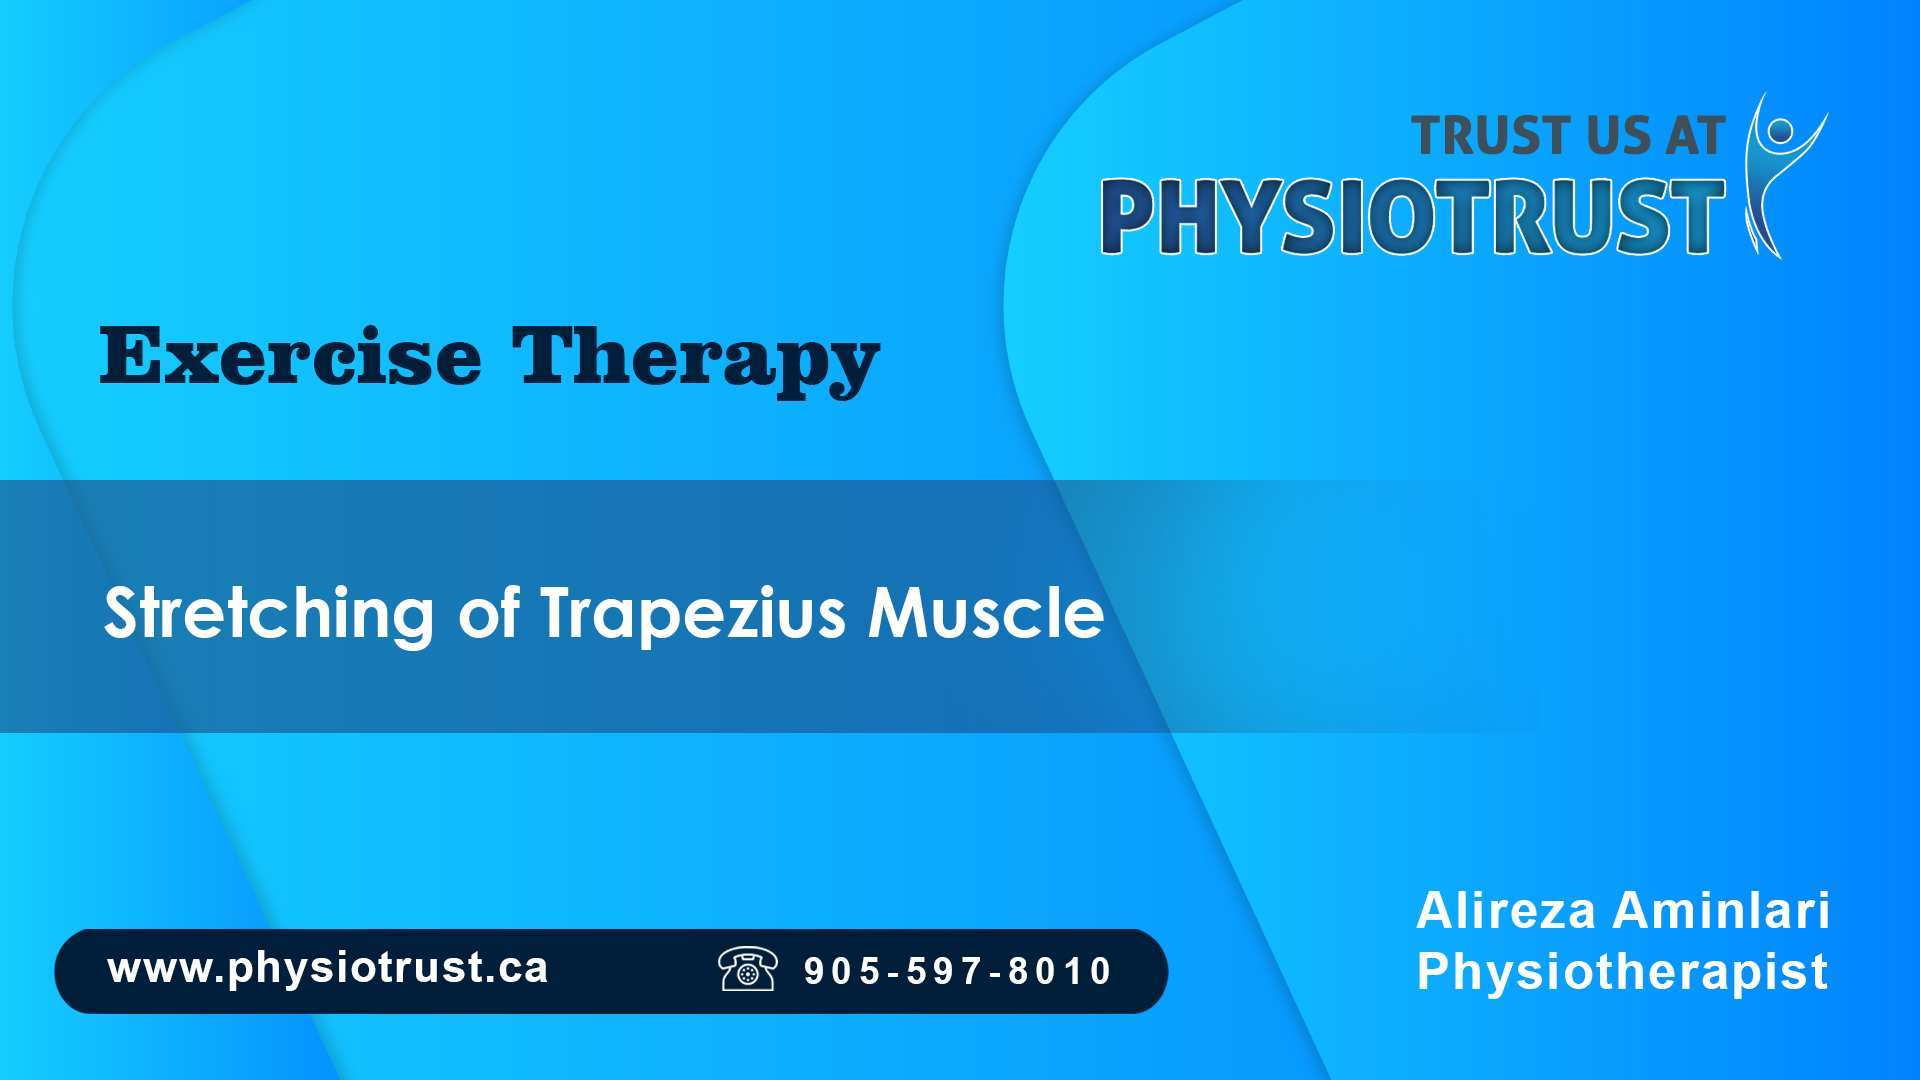 Stretching of trapezius muscle